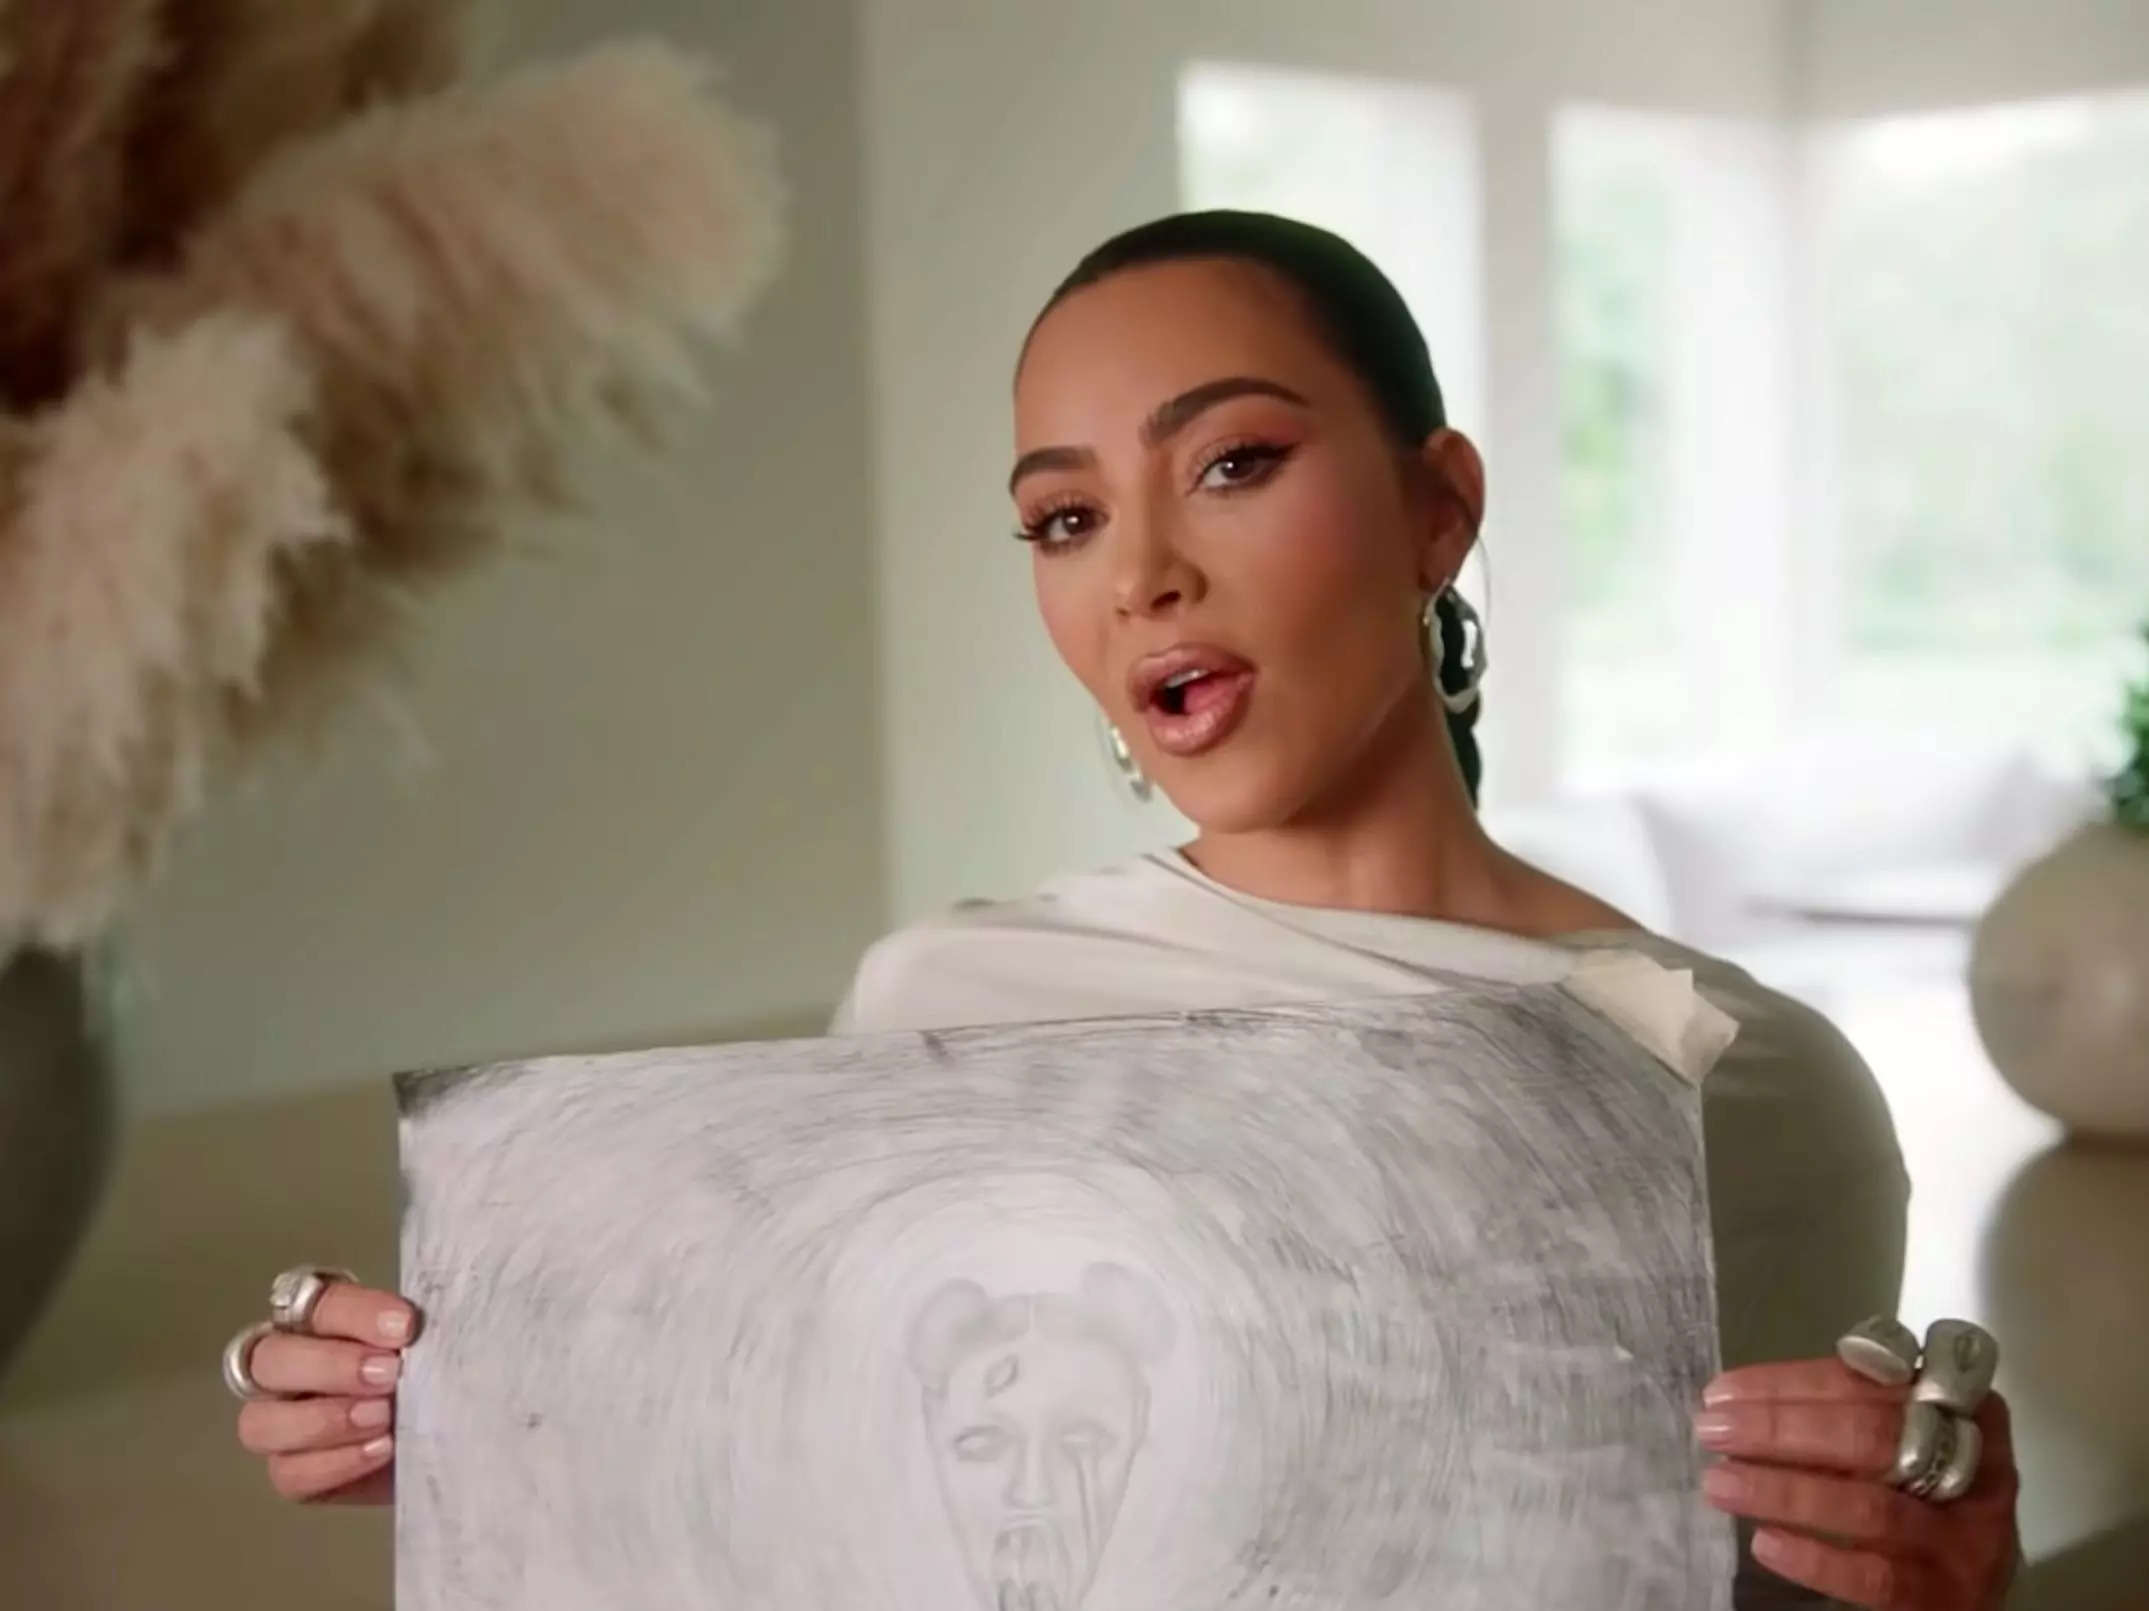 Kim Kardashian shows off a charcoal drawing North West made in